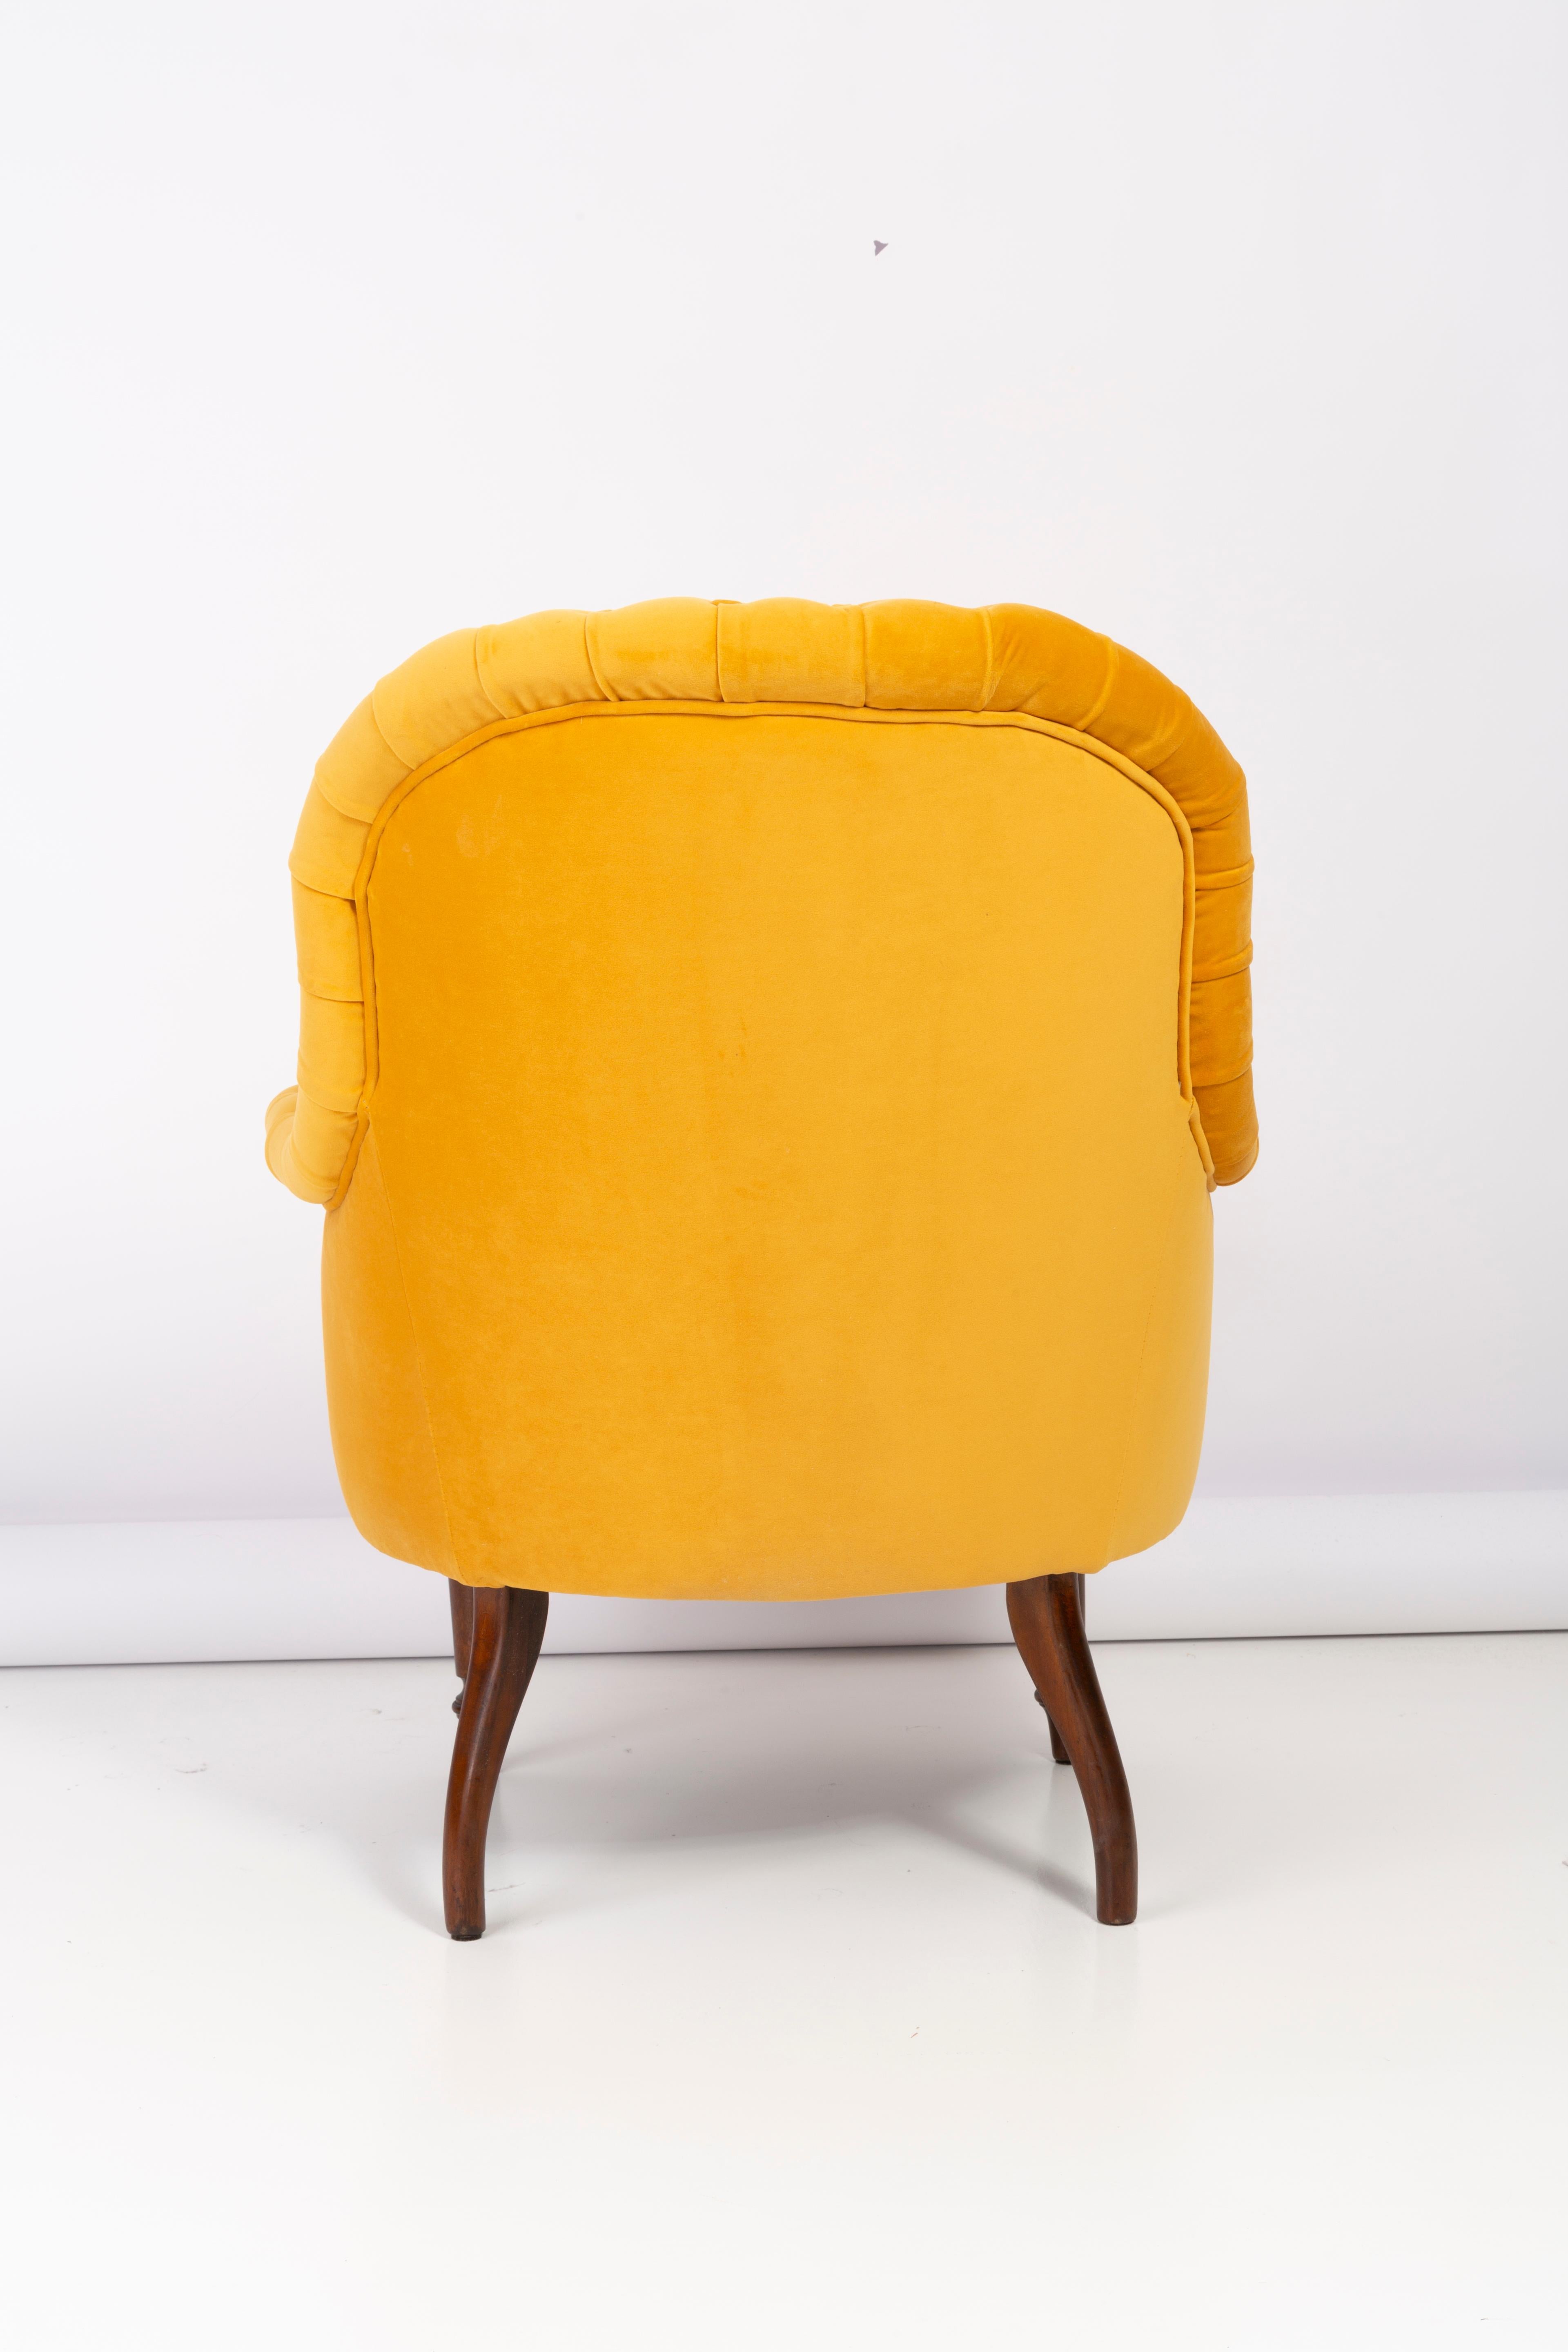 Unique Yellow Mustard Armchair, 1930s, Germany For Sale 4